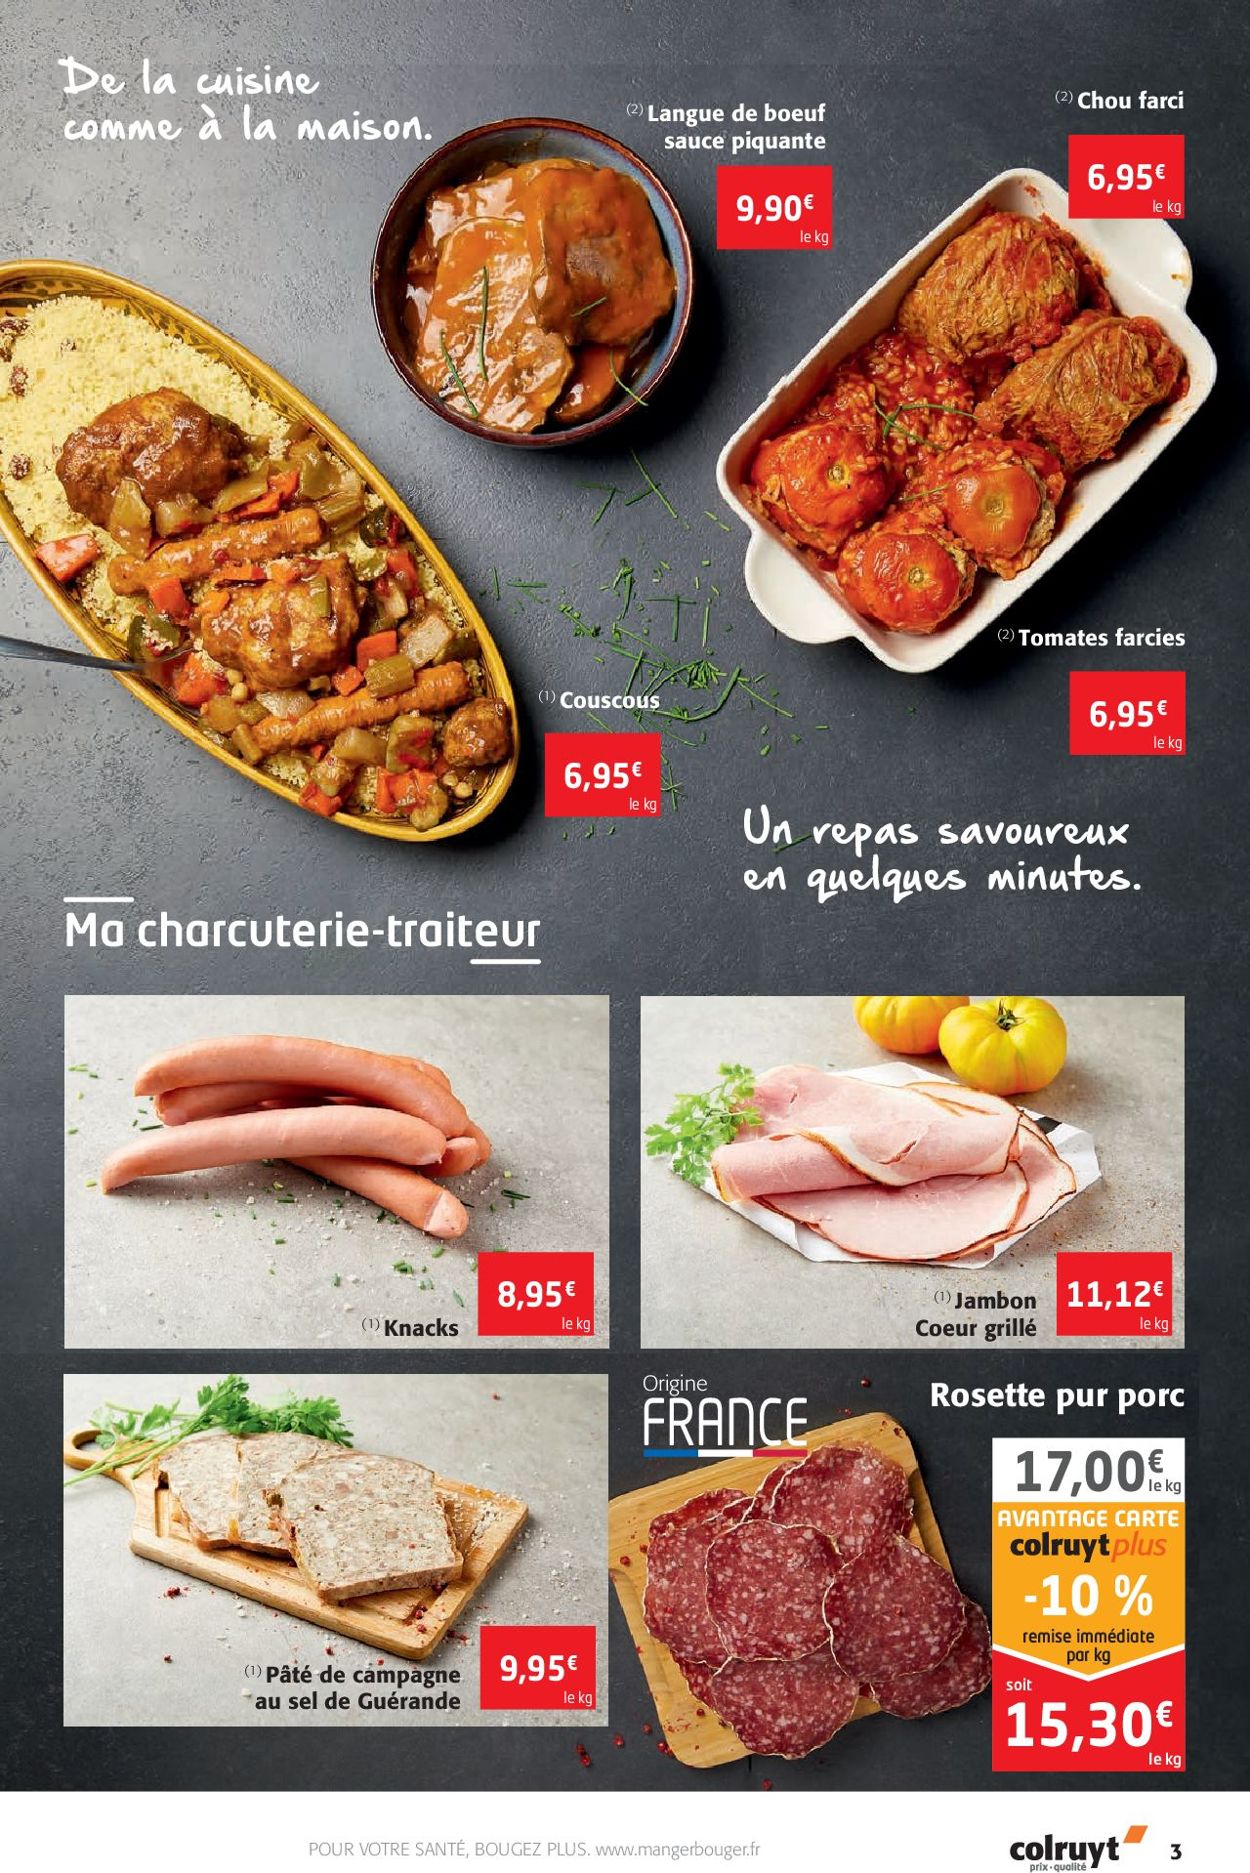 Colruyt Catalogue - 04.09-08.09.2019 (Page 3)